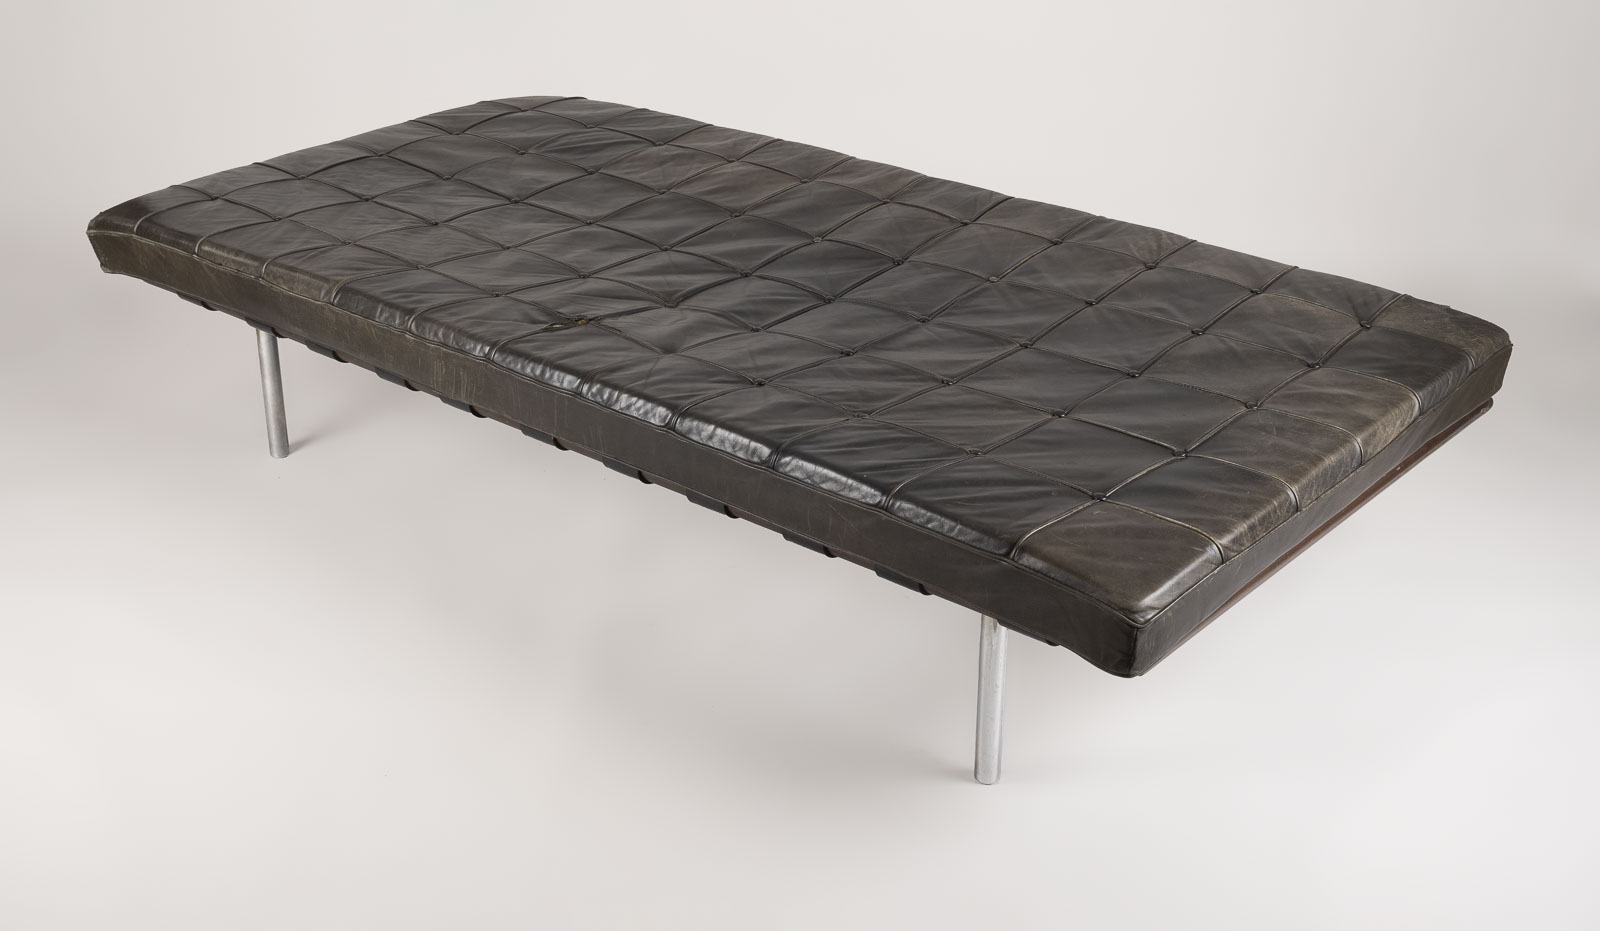 DAYBED / LIEGE MODELL 'BARCELONA'